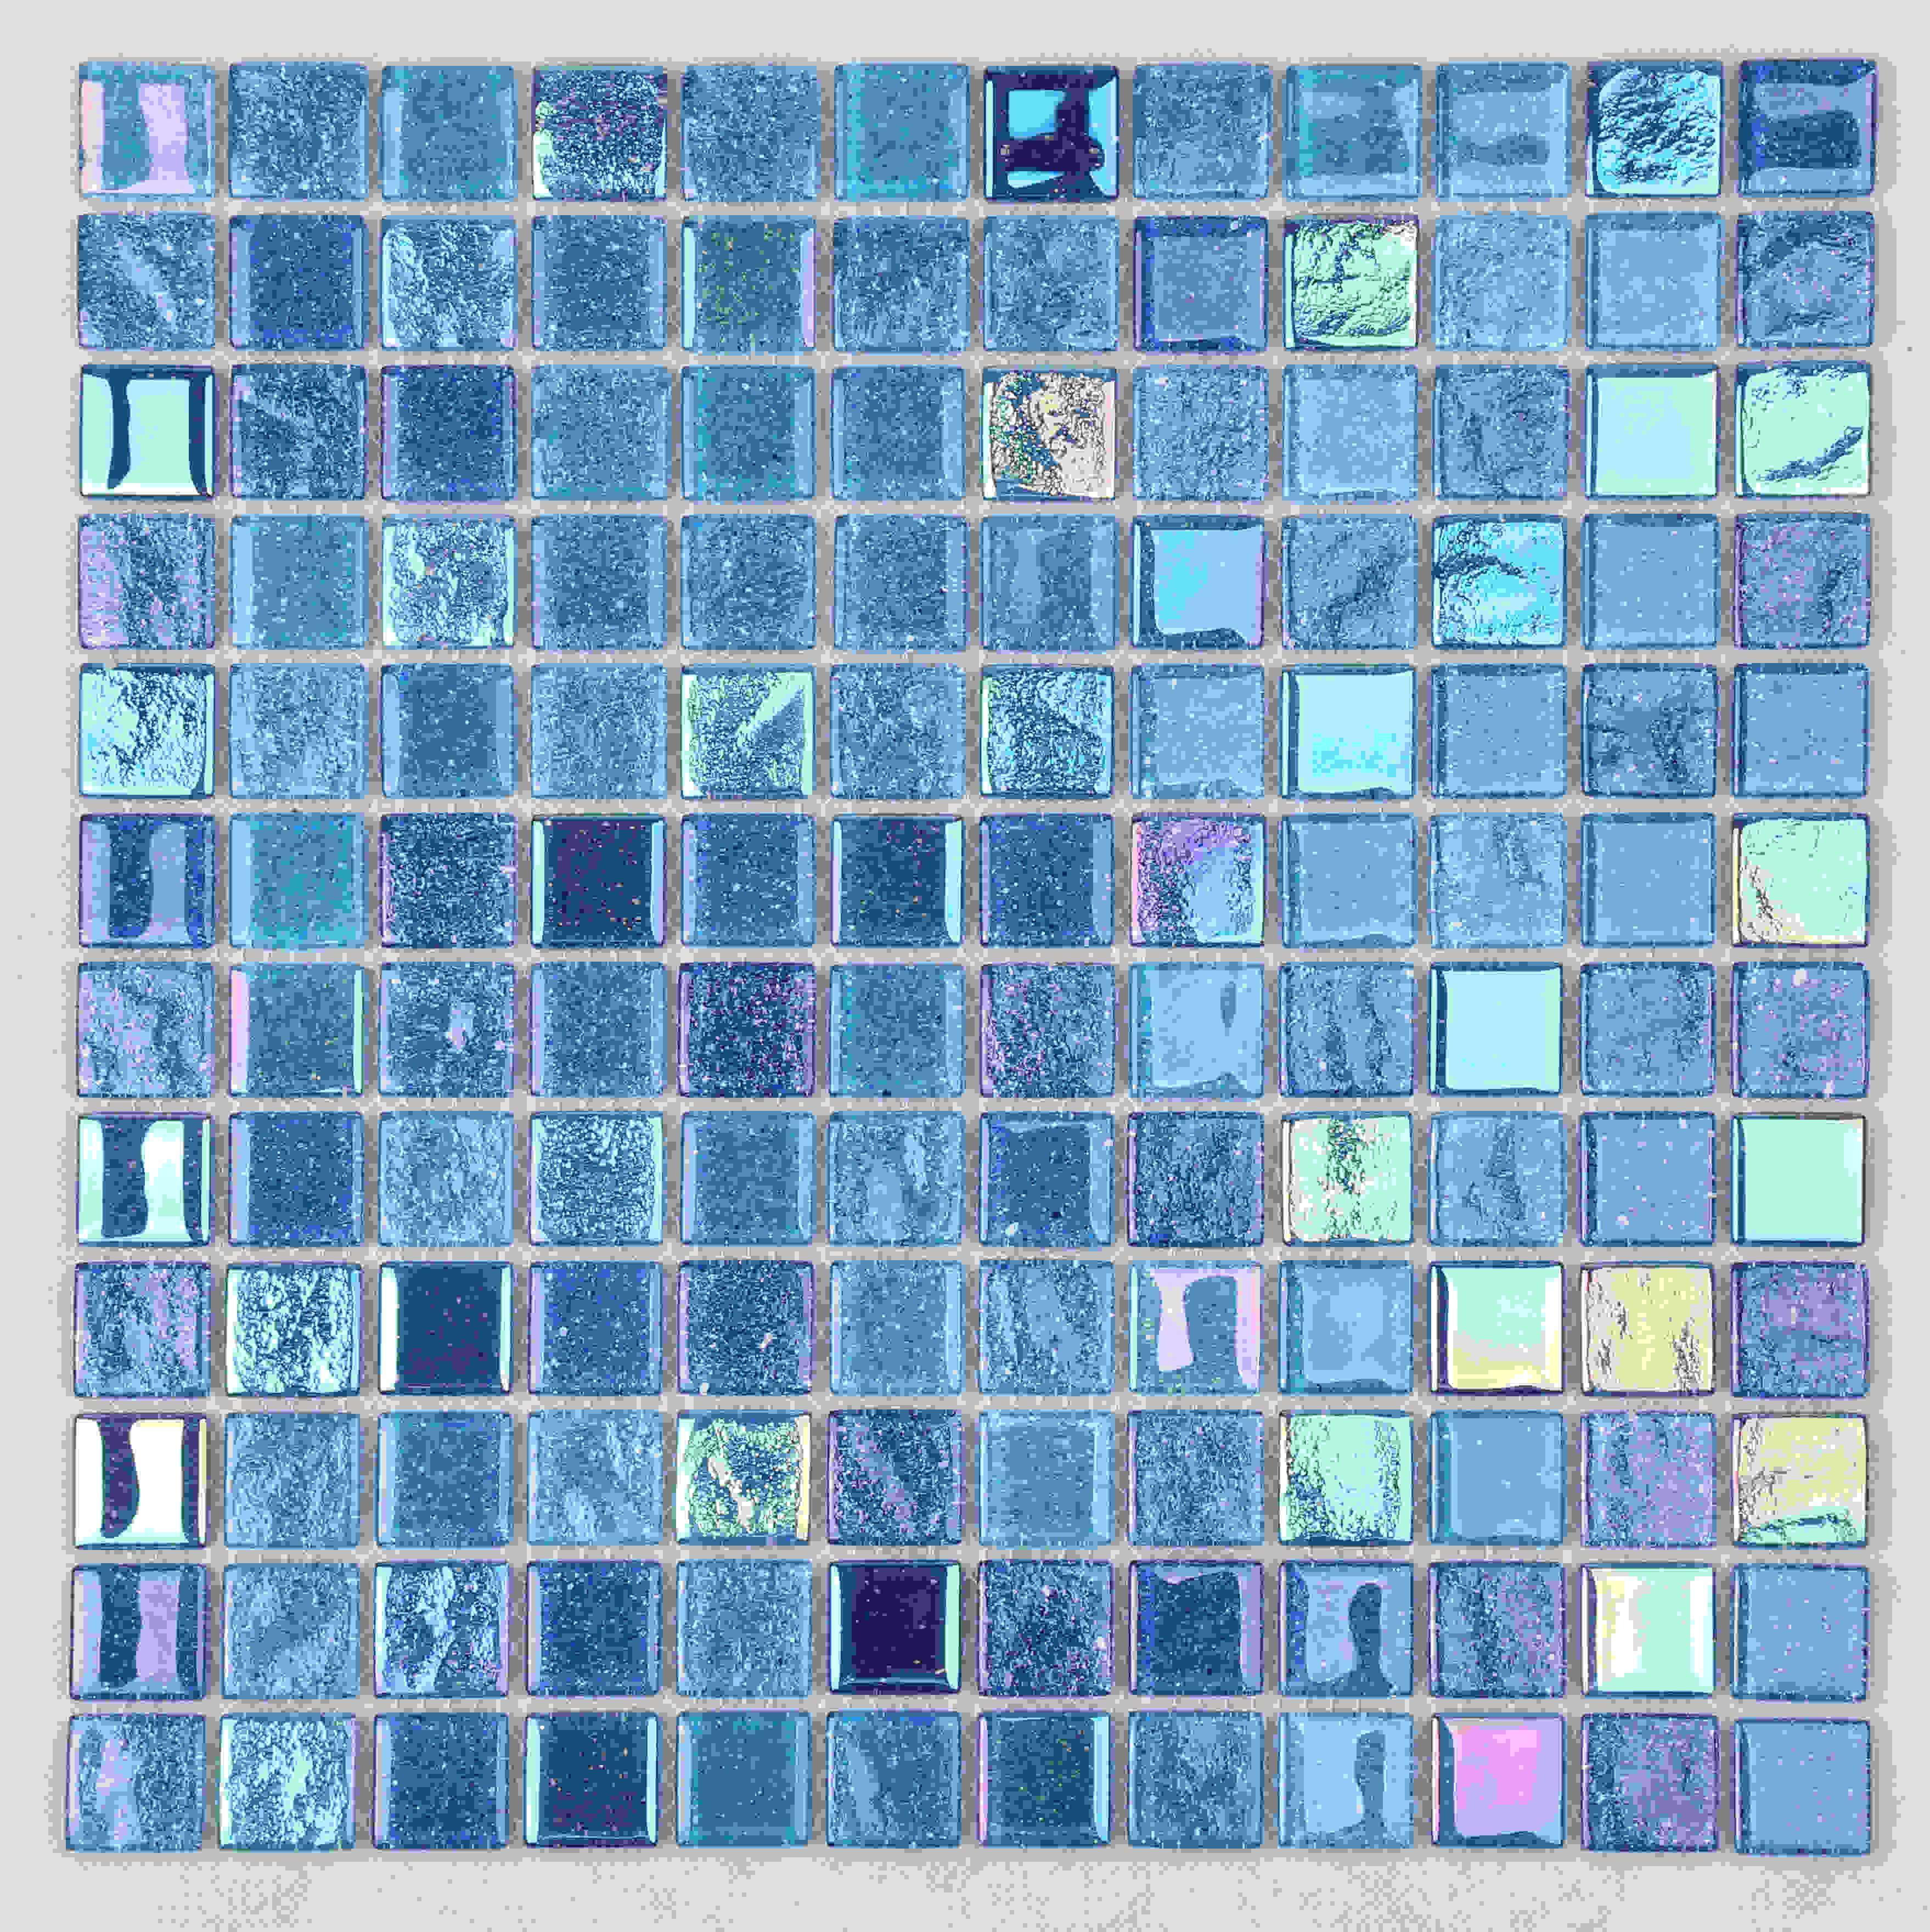 Top mosaic tile art floor Suppliers for spa-1